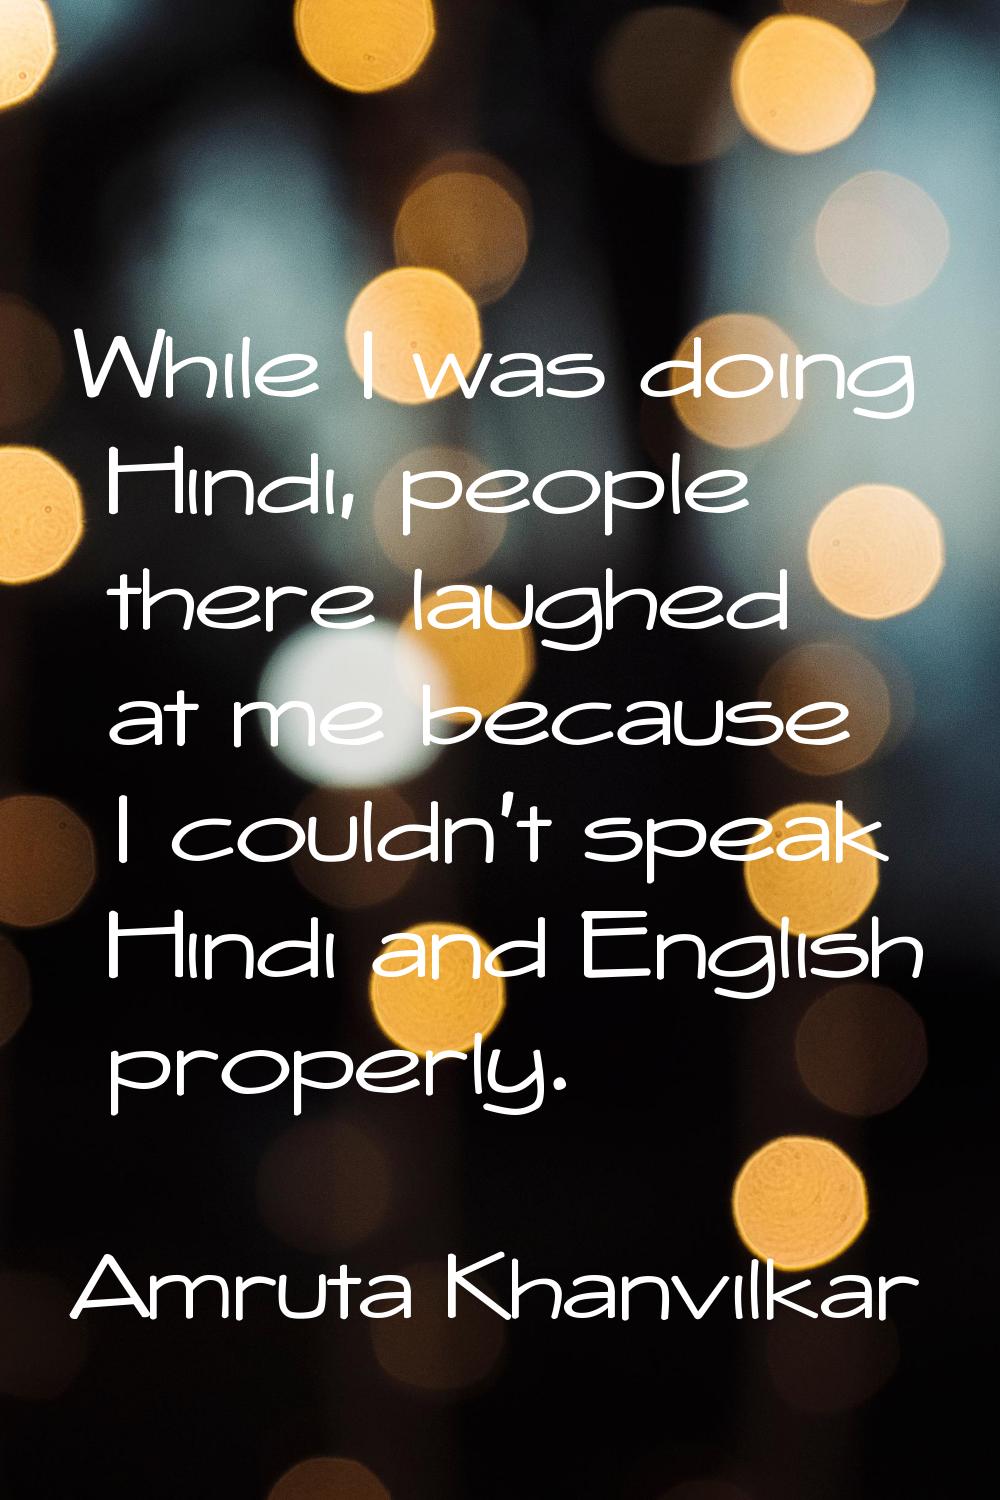 While I was doing Hindi, people there laughed at me because I couldn't speak Hindi and English prop